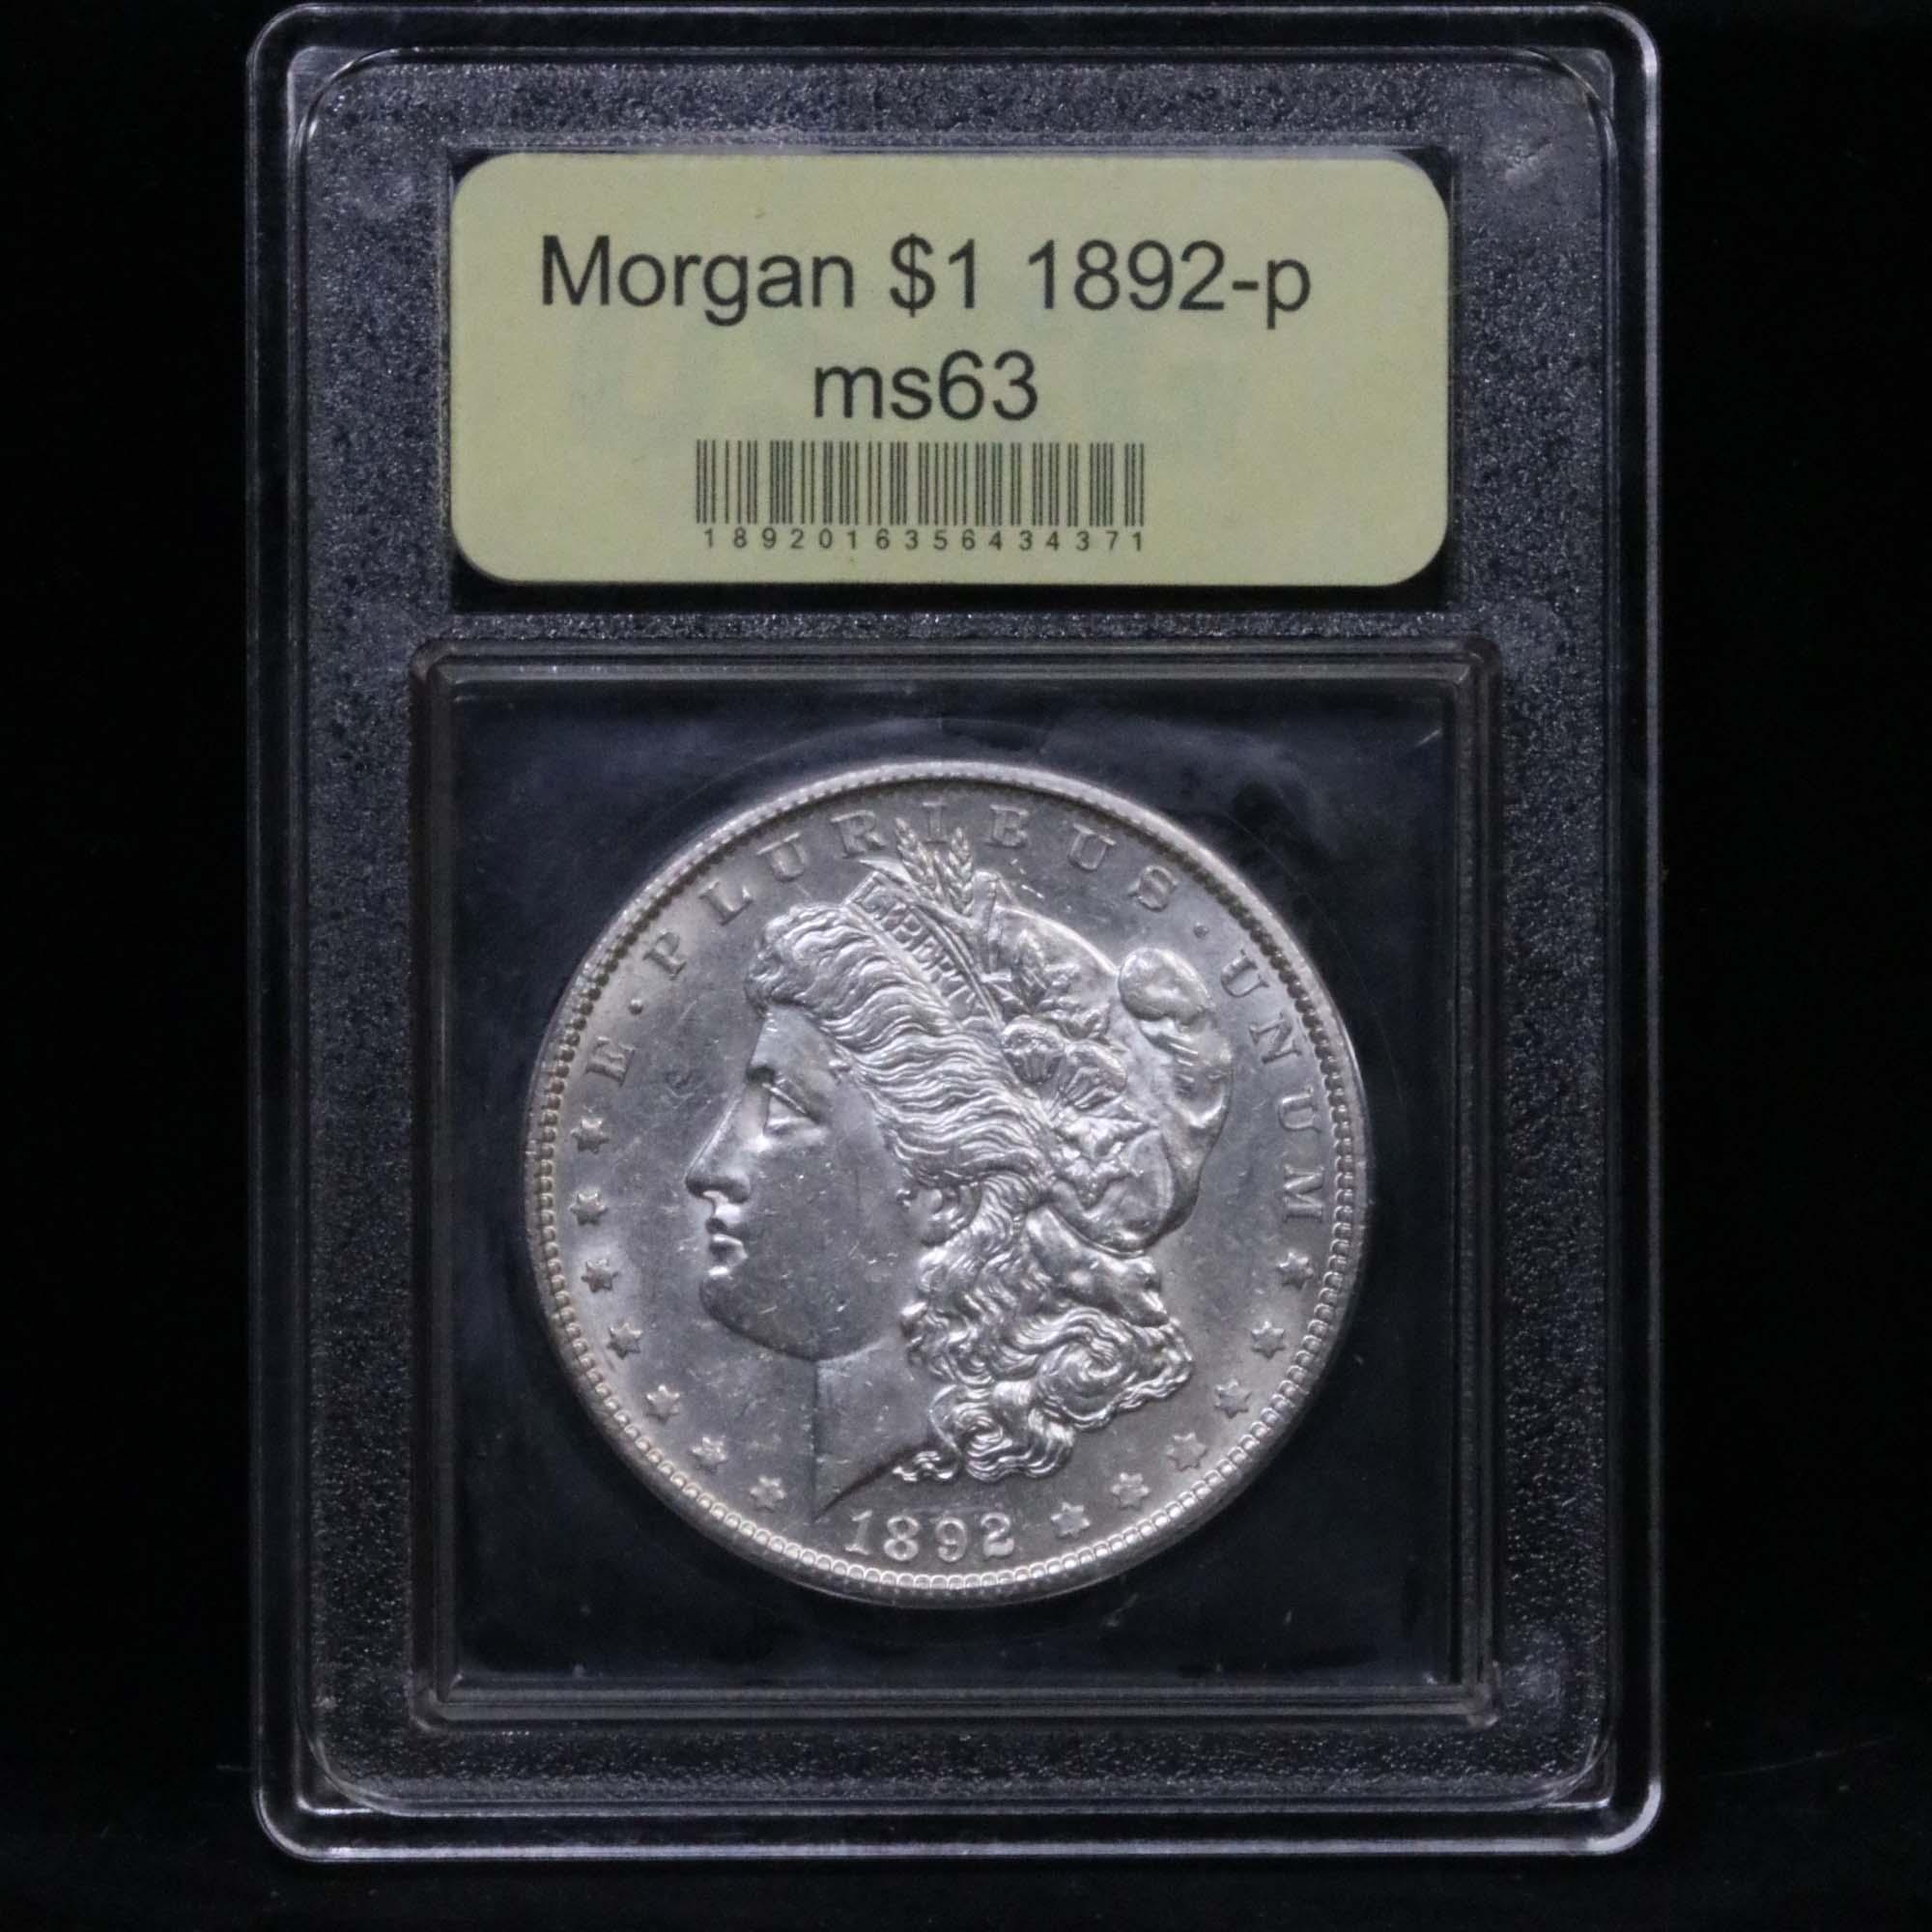 ***Auction Highlight*** 1892-p Morgan Dollar $1 Graded Select Unc by USCG (fc)